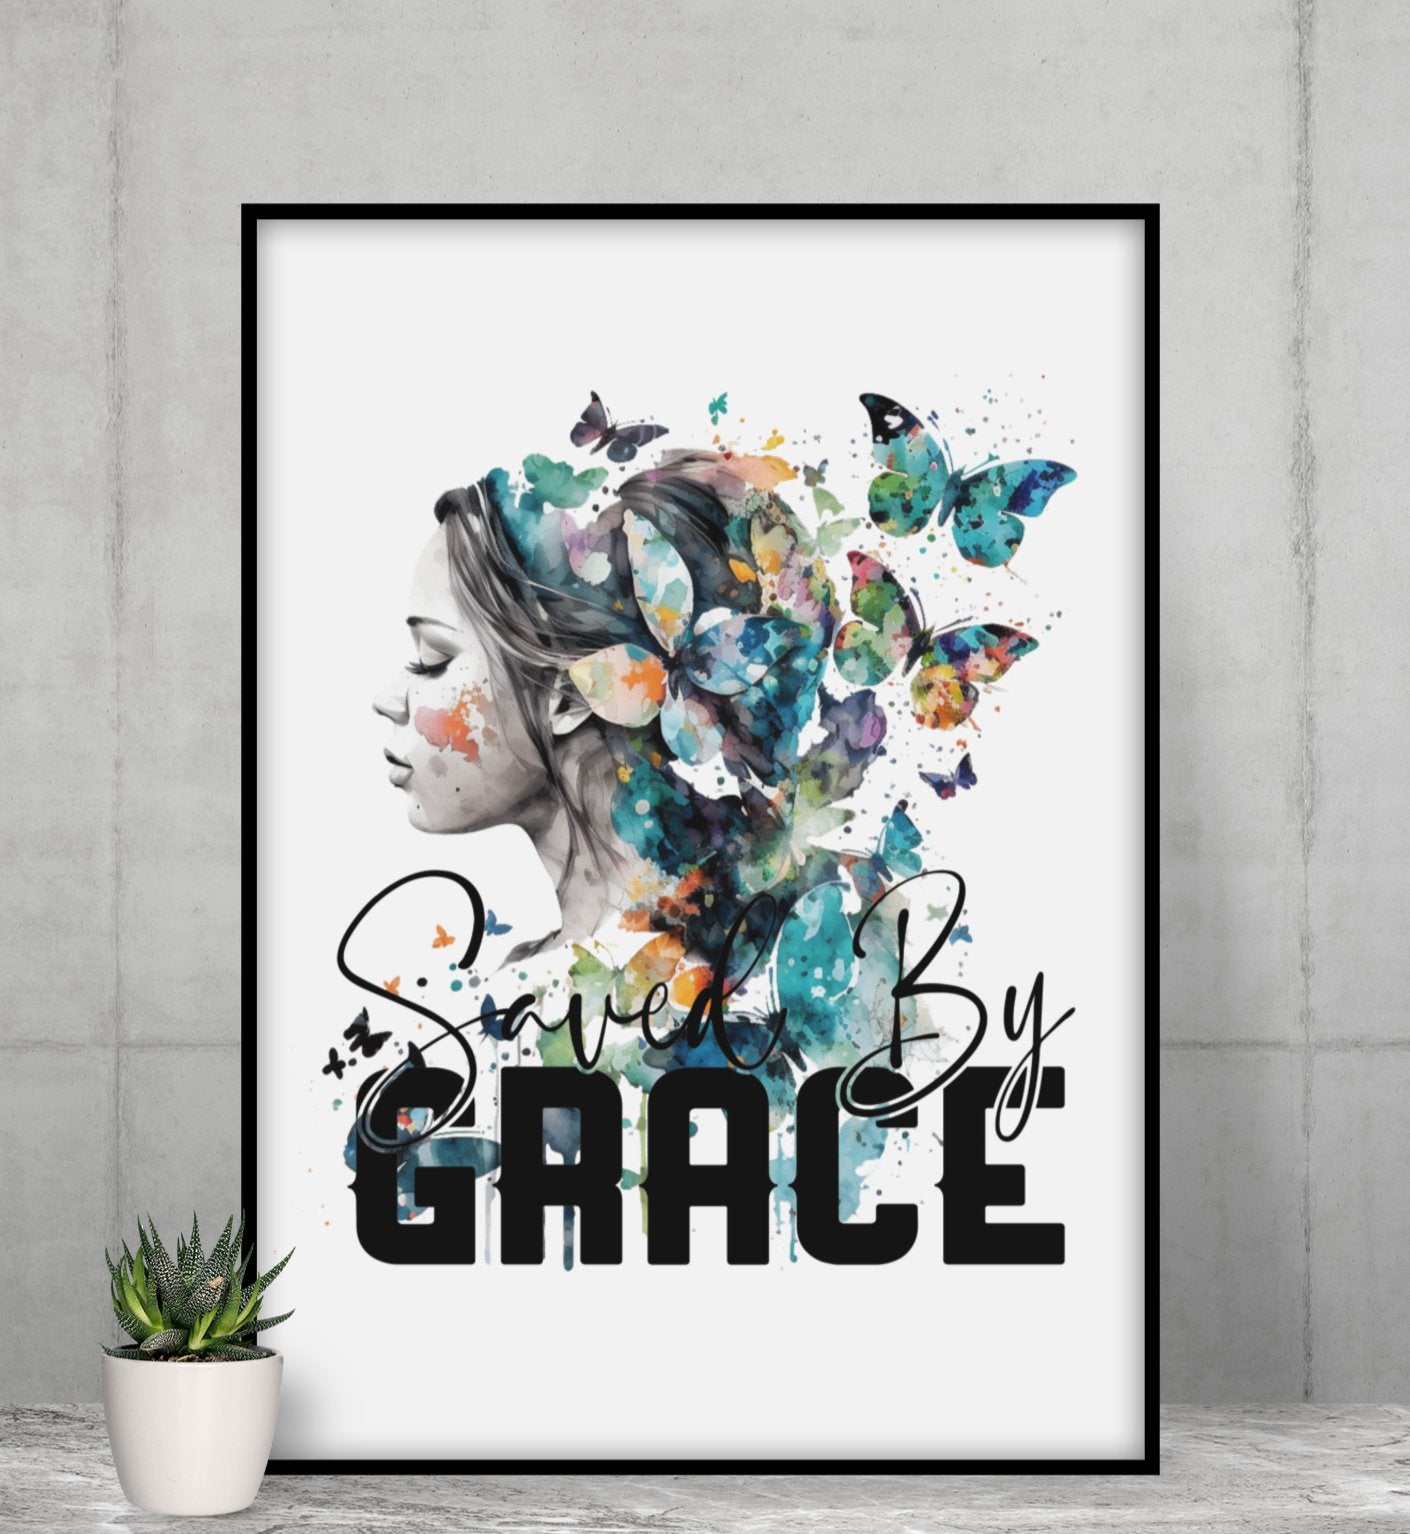 Saved by Grace Poster - Make-Hope